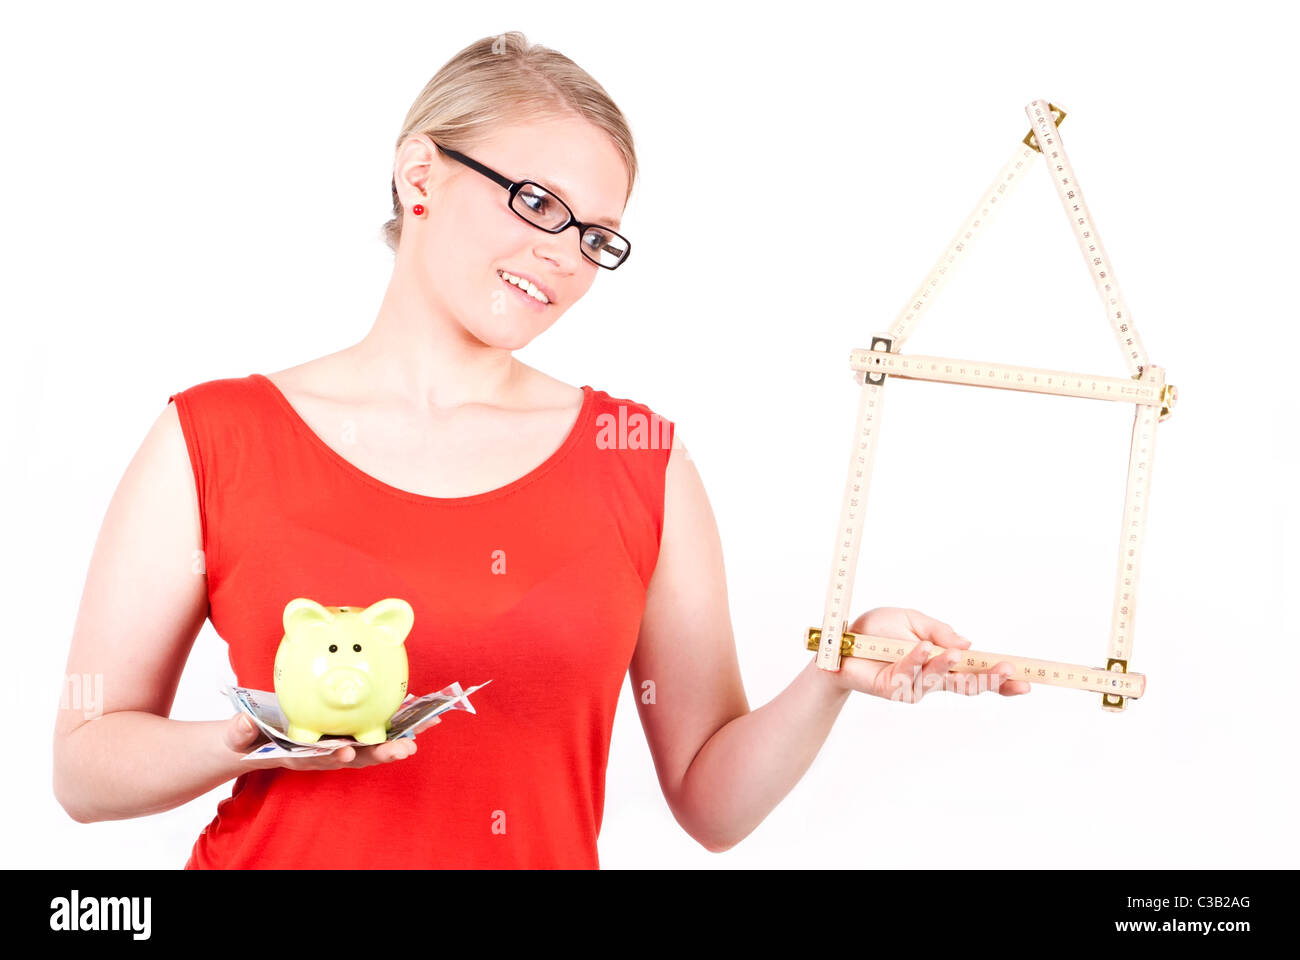 young woman with folding rule as a house symbol and piggy bank before white background Stock Photo